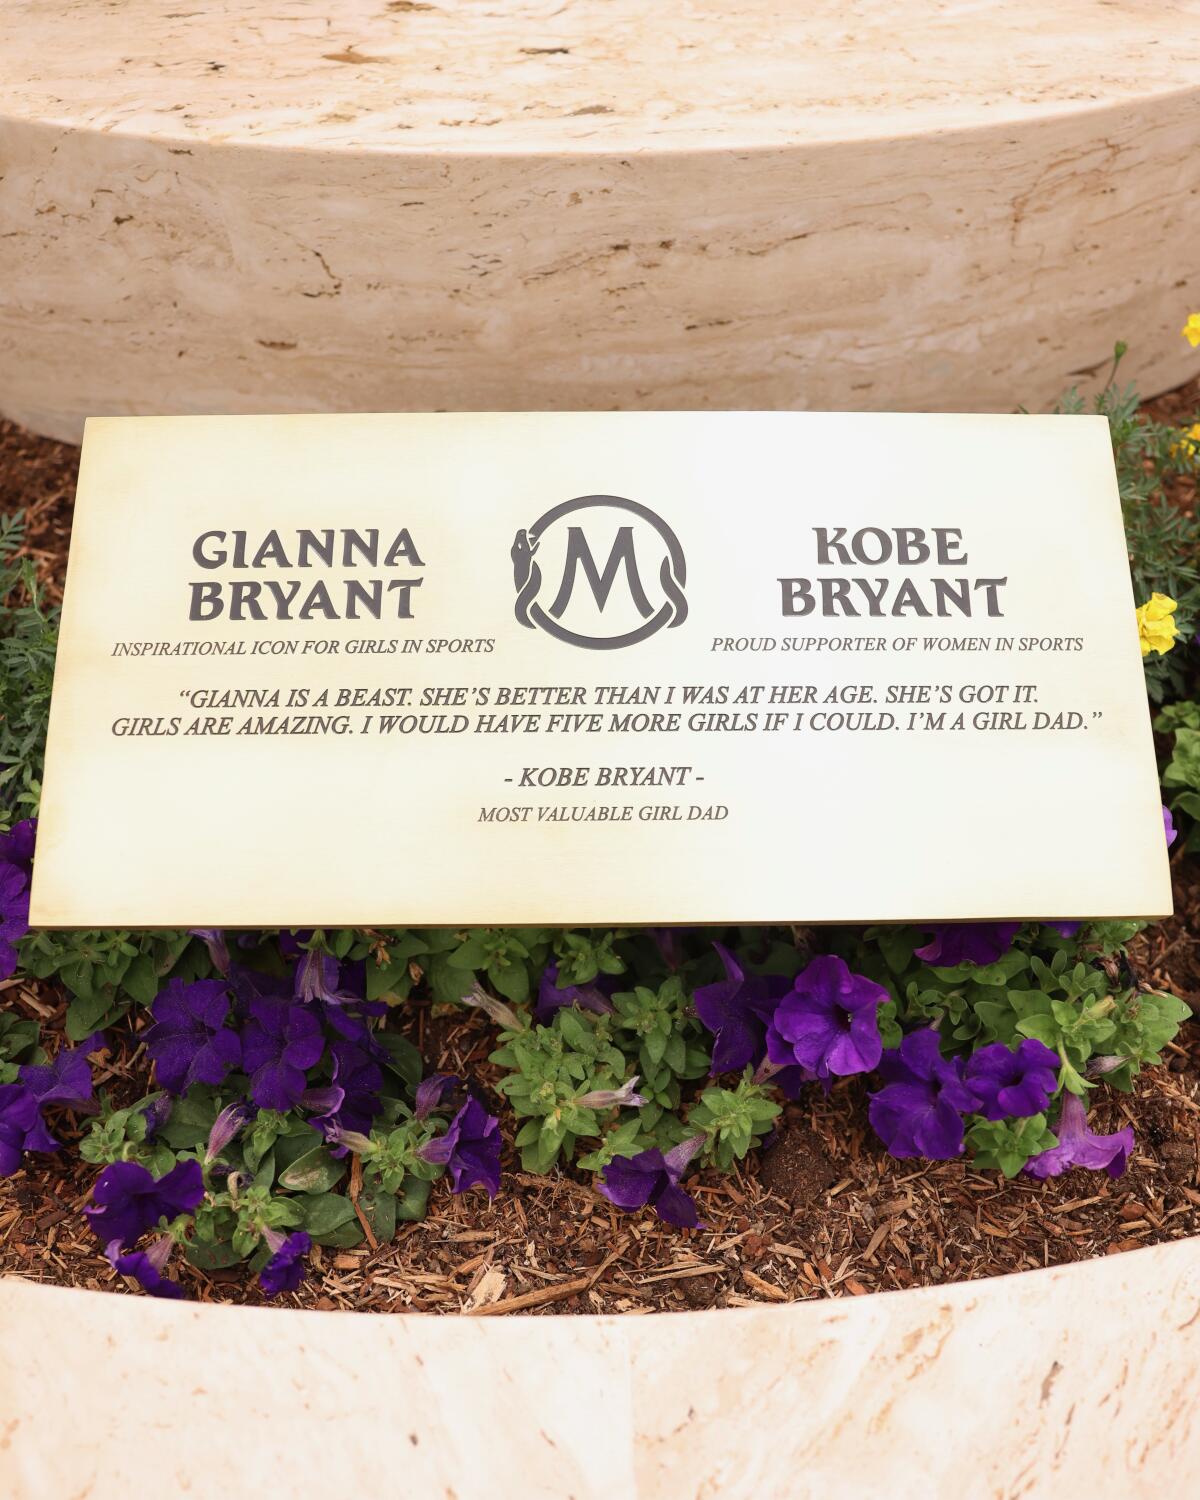 A plaque in front of a statue featuring Kobe and Gianna Bryant honors his commitment to being a "Girl Dad"